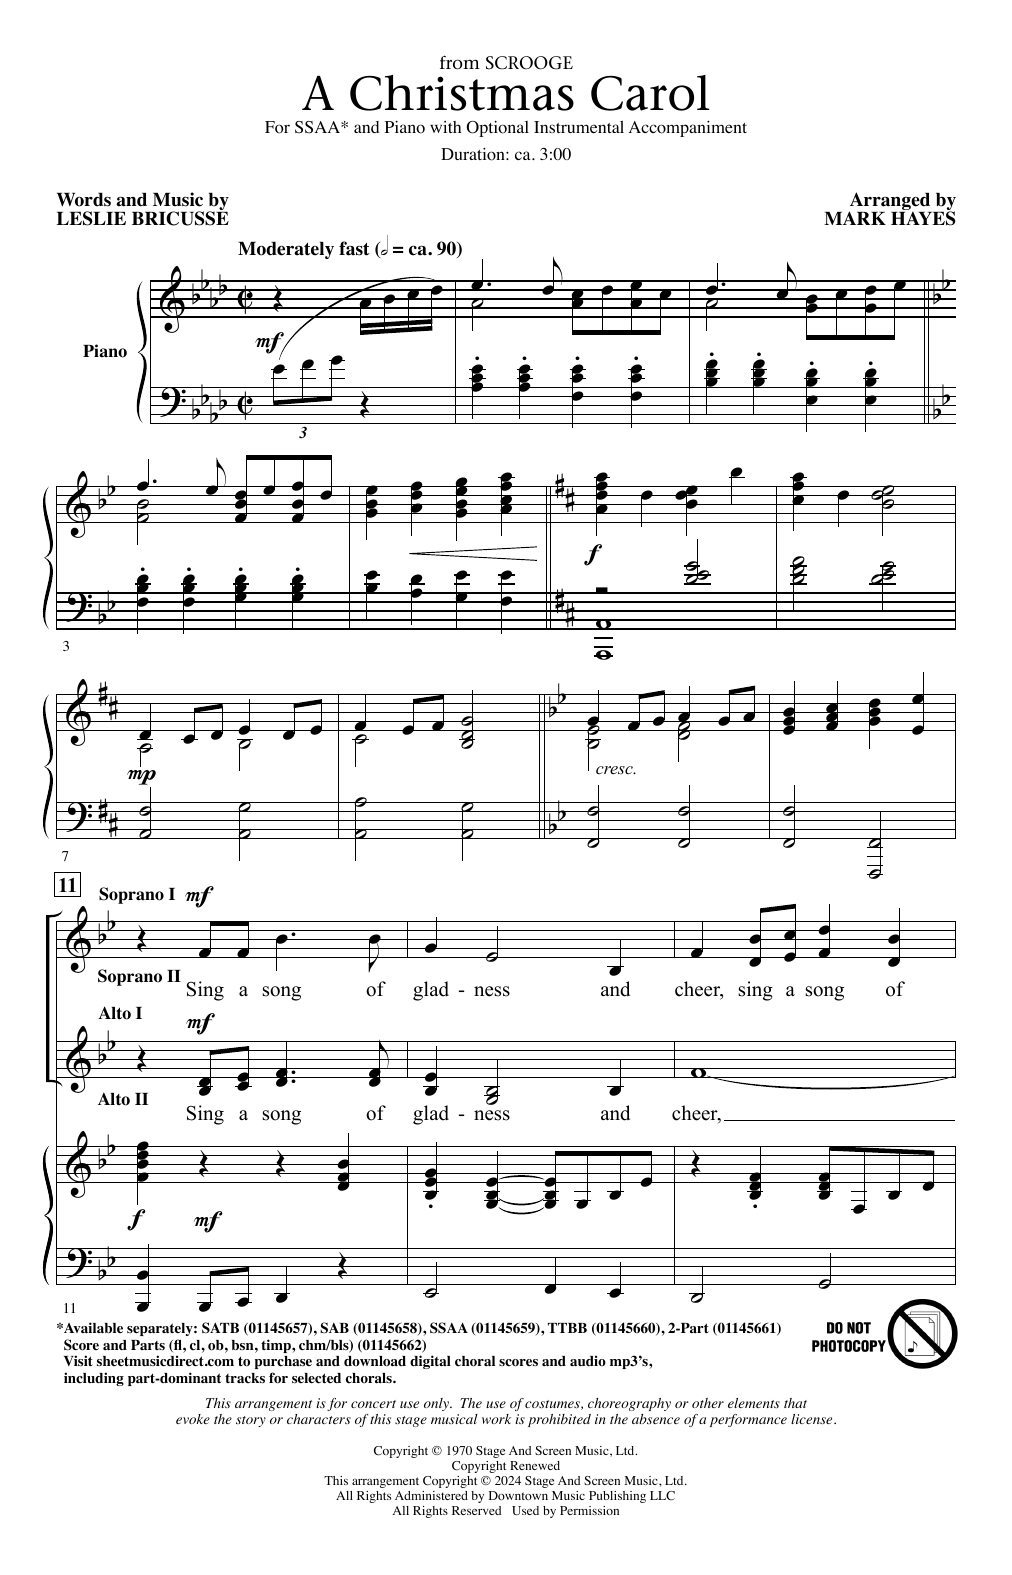 Leslie Bricusse A Christmas Carol (from Scrooge) (arr. Mark Hayes) sheet music notes printable PDF score